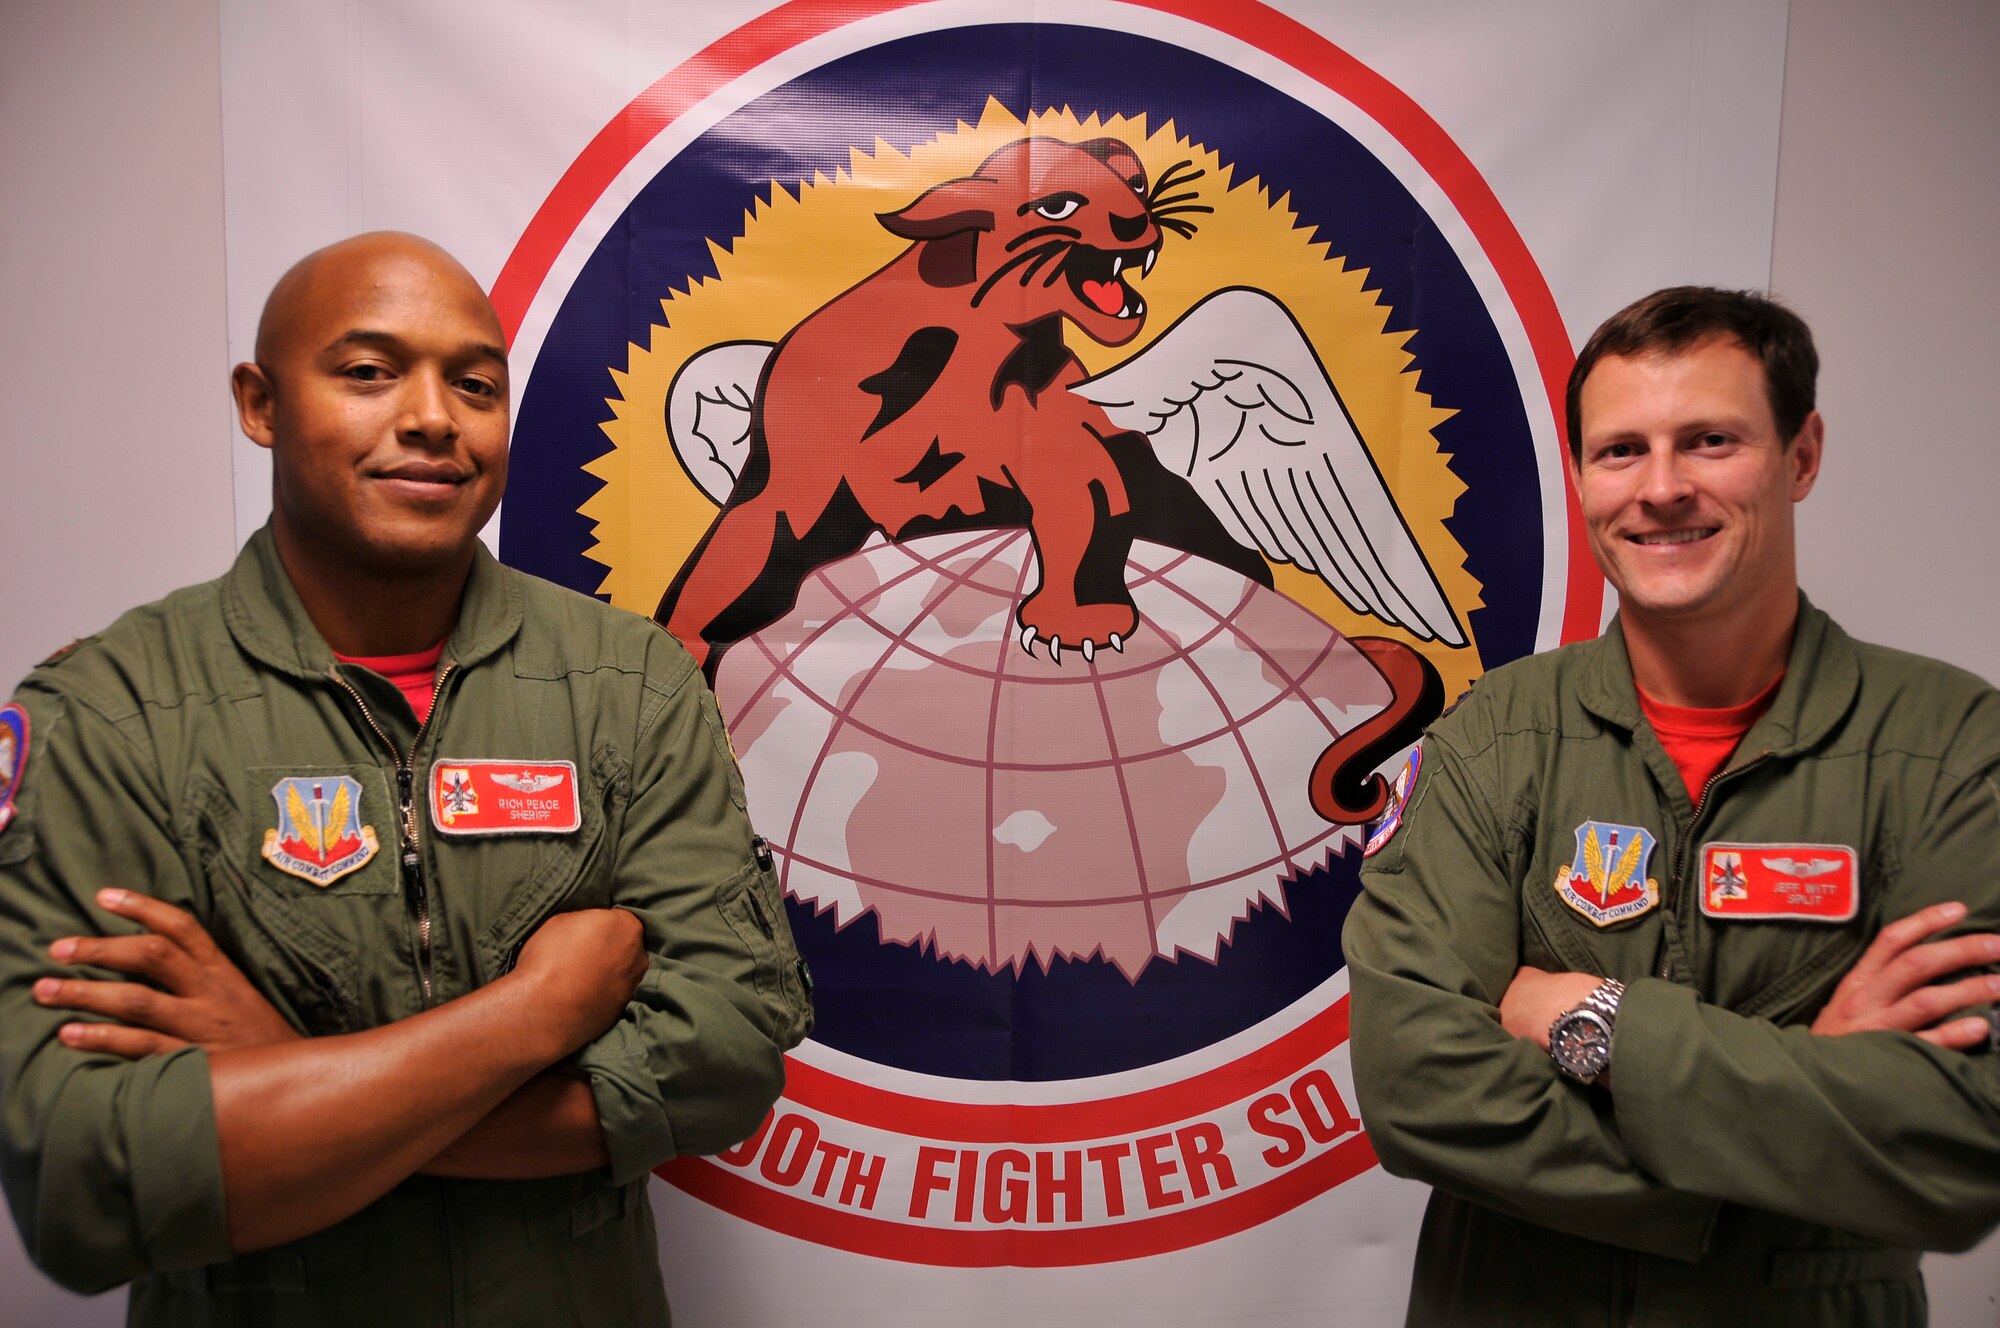 187th Fighter Wing pilots Maj. Richard Peace and Capt. Jeffrey Witt were awarded the Air Combat Command Outstanding Aircrew Award while deployed to Bagram, Afghanistan in 2014.(U.S. Air Force photo by Tech. Sgt. Matthew Garrett\ Released)